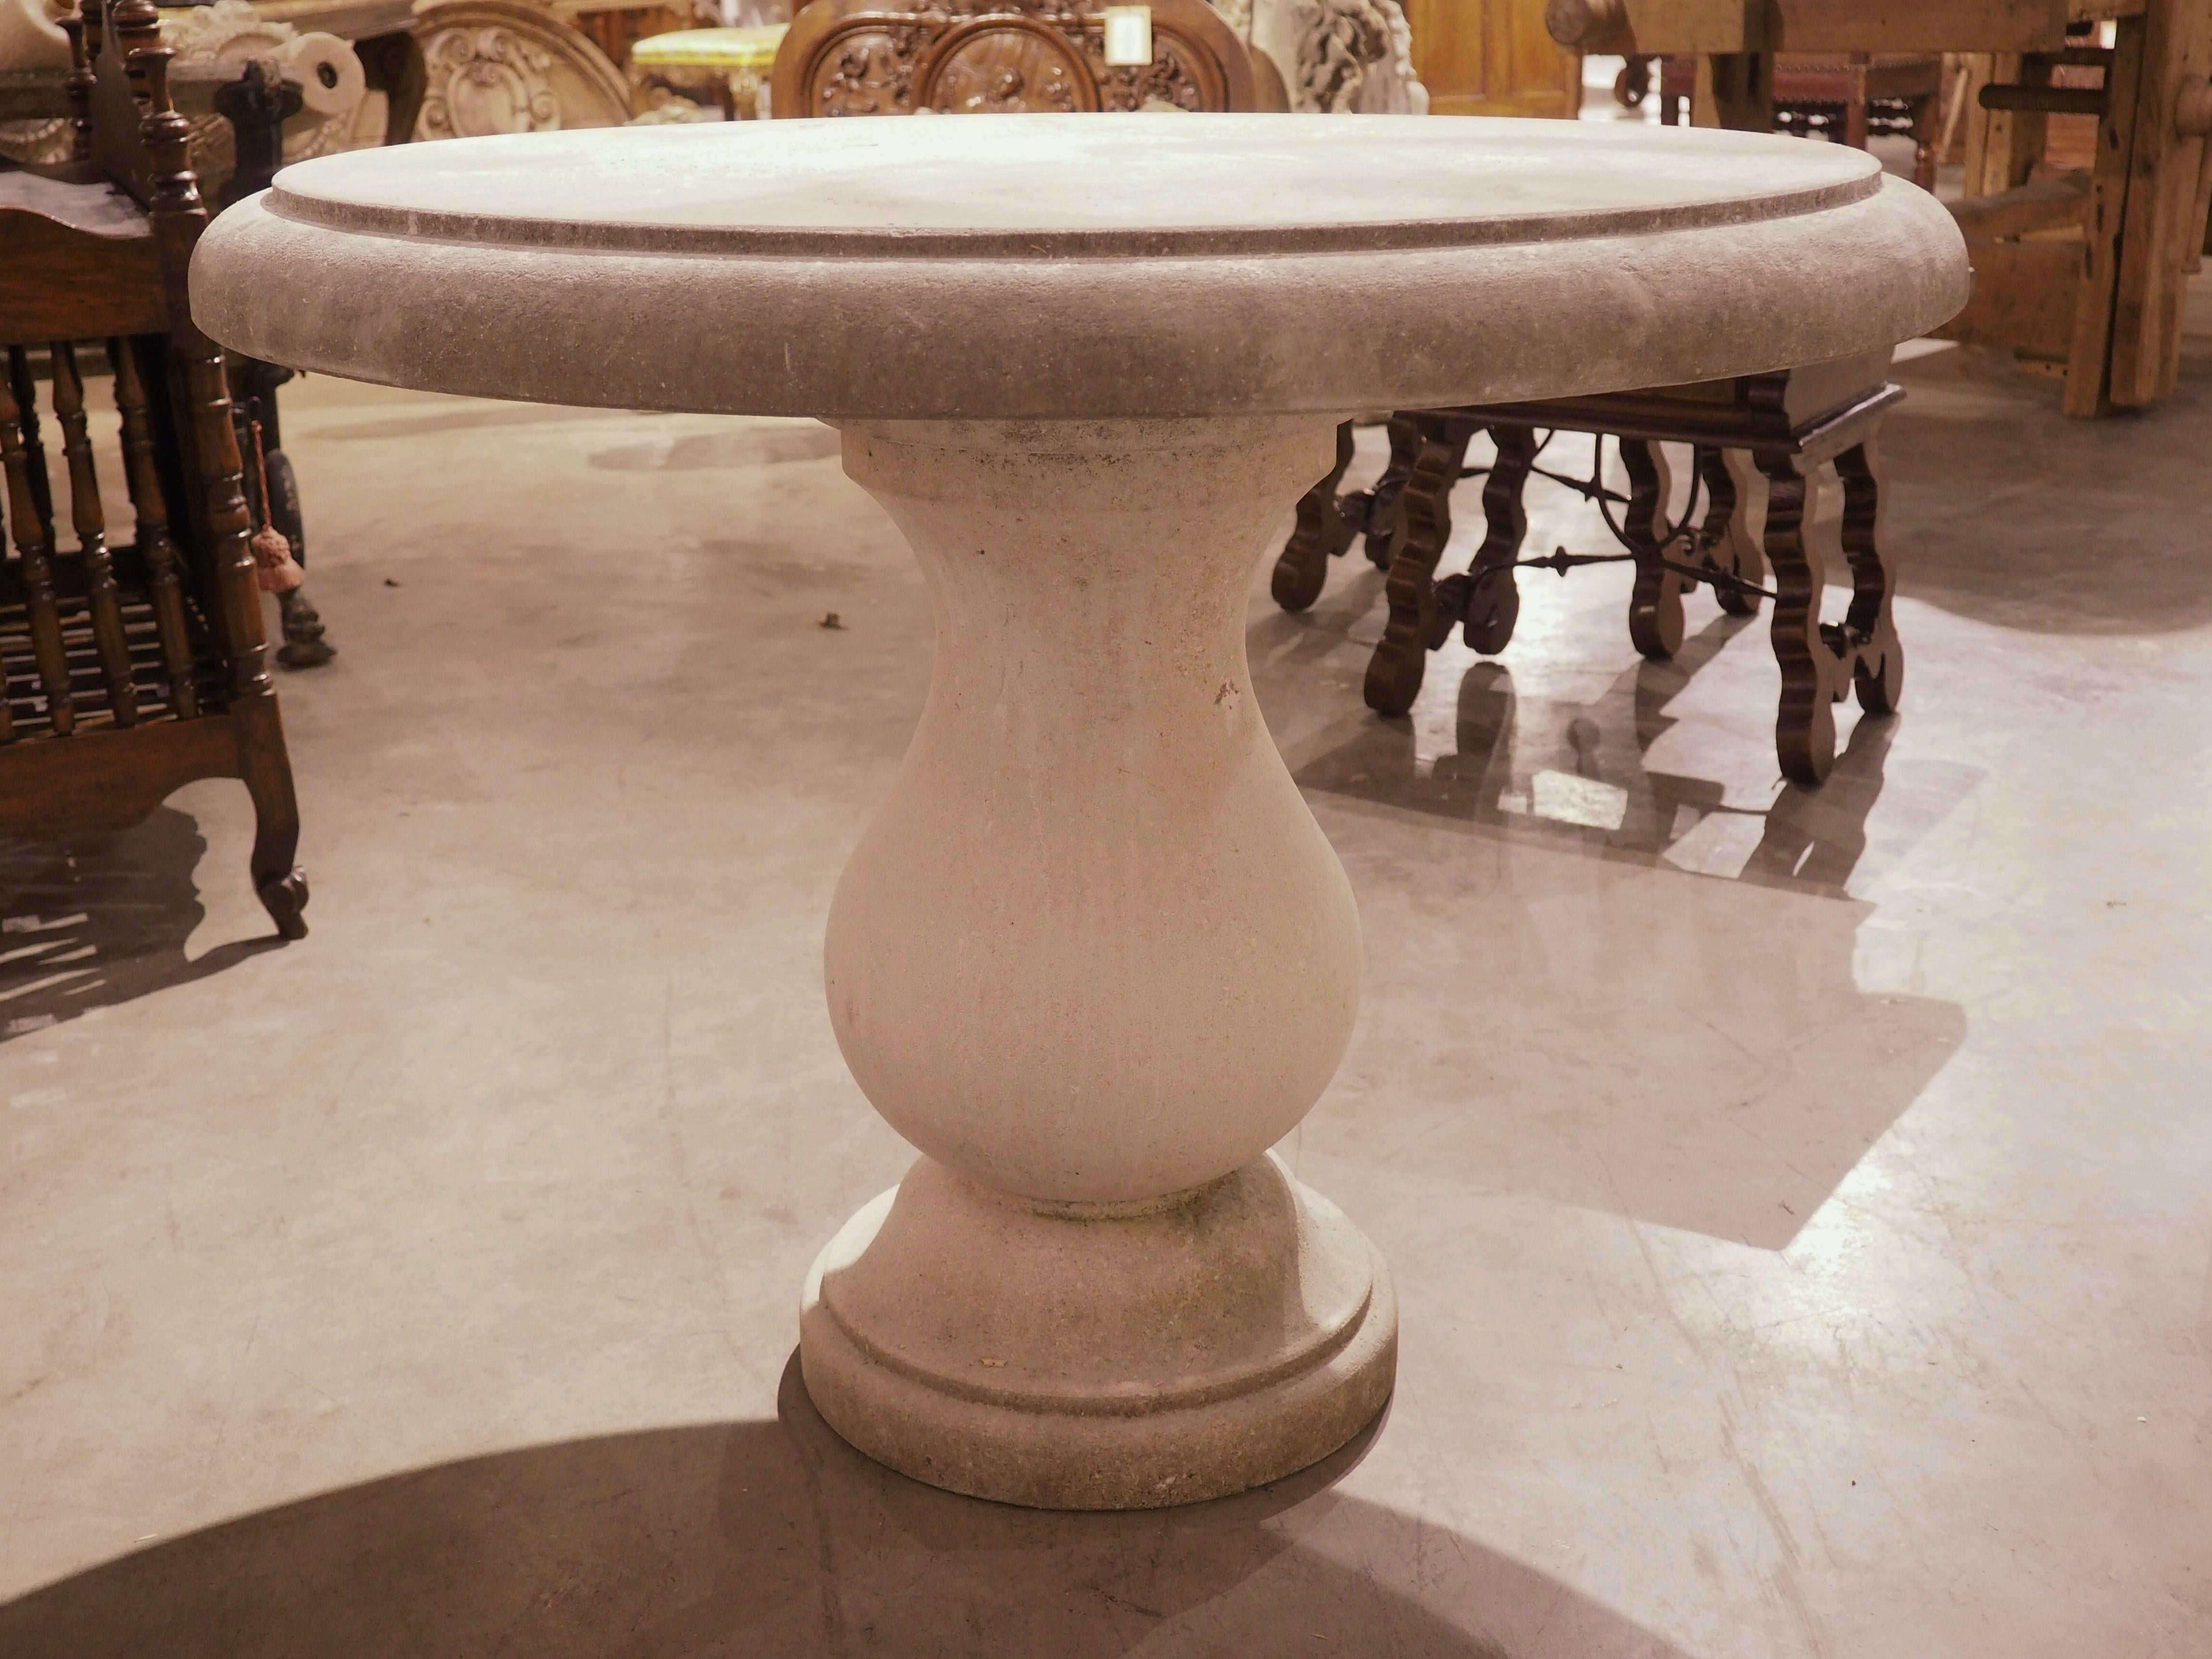 From Italy, this circular hand-carved limestone table has a baluster form base with a molded circular plinth. The three-inch-thick top has a recessed quarter round molding. Perfect for indoors or outside, this charming stone table can be used as a